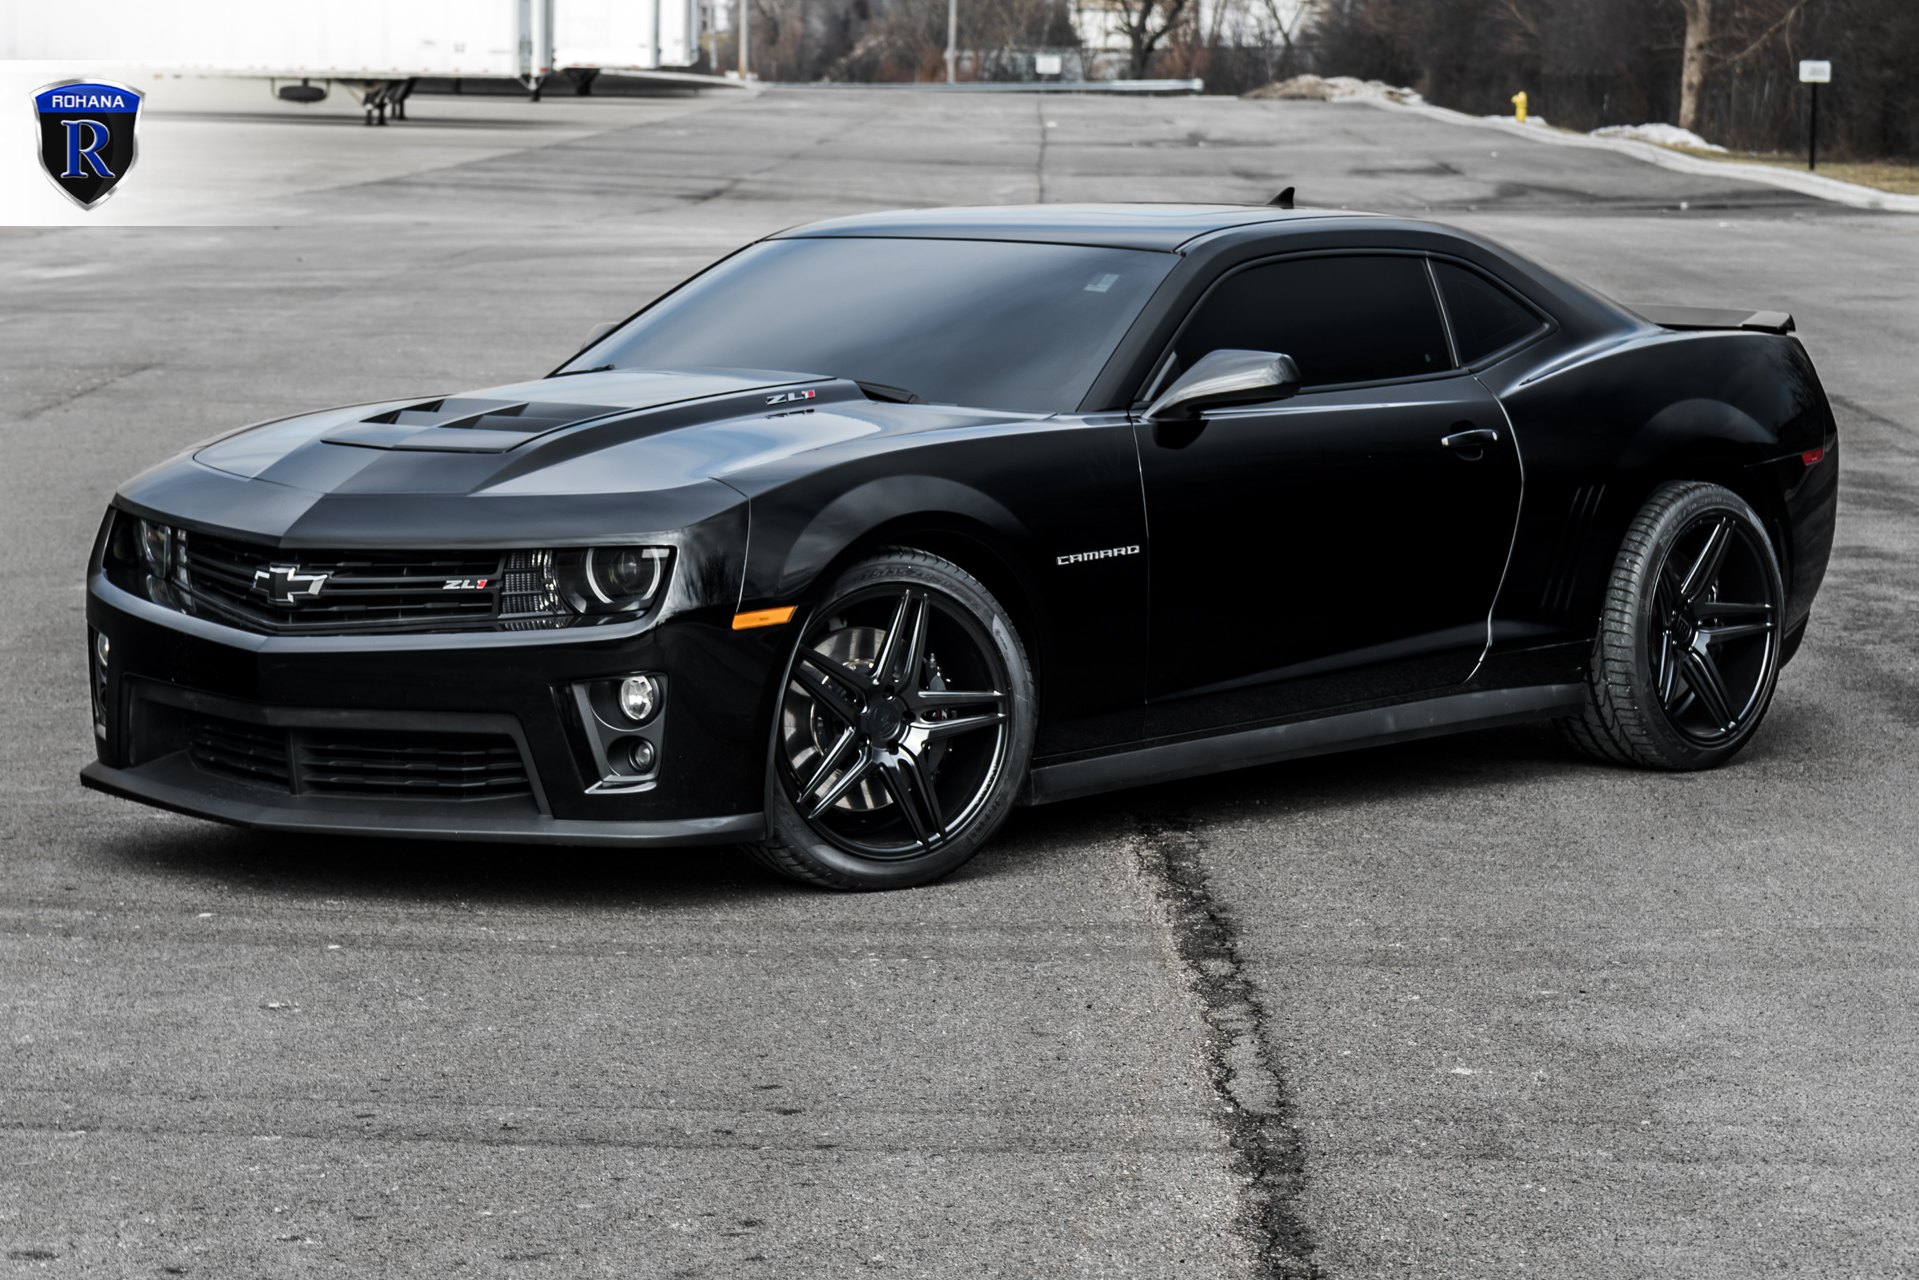 Black Chevy Camaro ZL1 with Aftermarket Vented Hood - Photo by Rohana Wheels